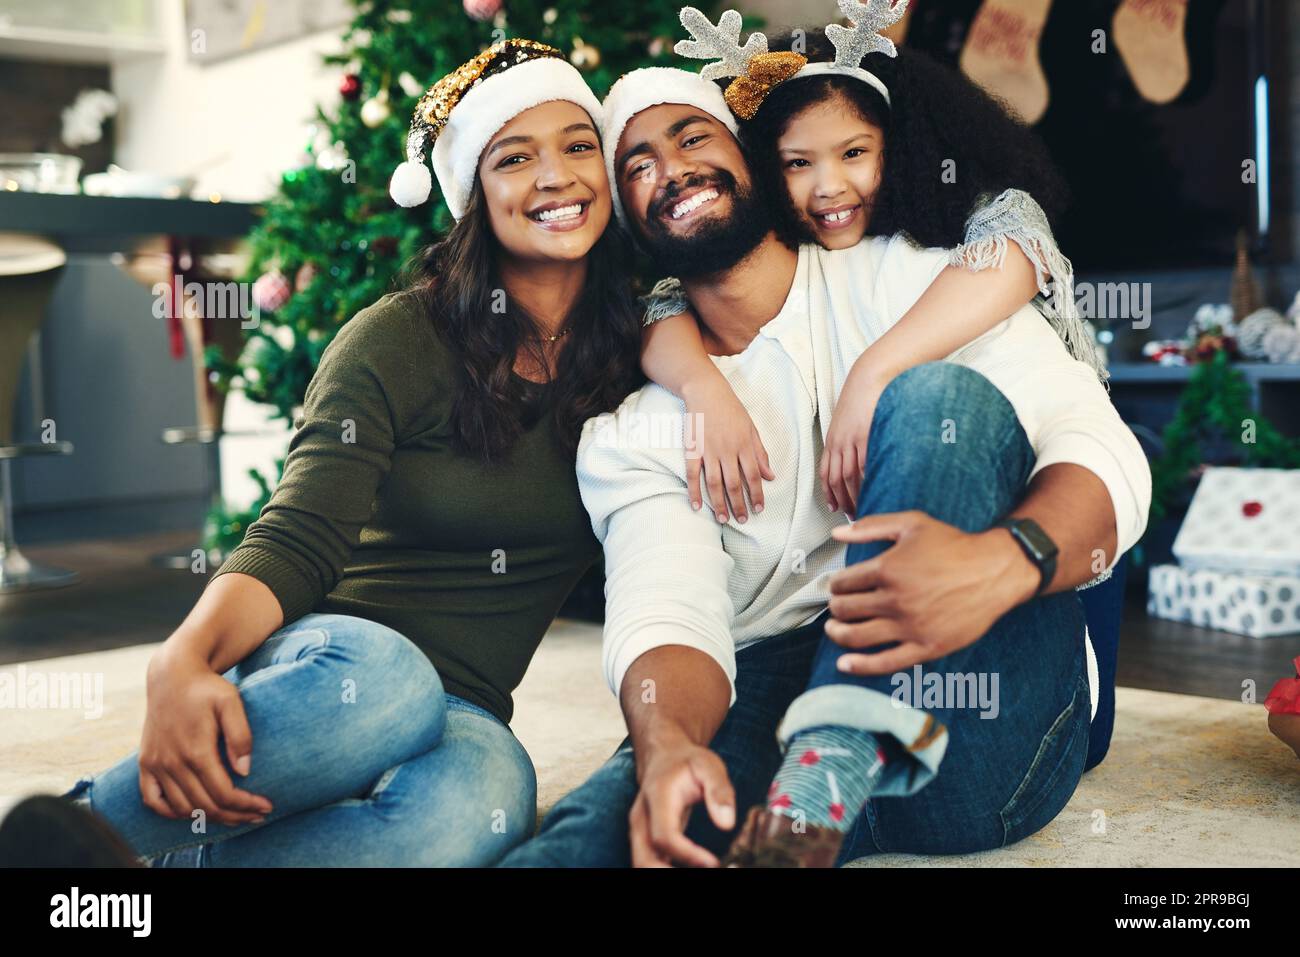 The spirit of Christmas summed up in one moment. Portrait of a happy young family celebrating Christmas at home. Stock Photo